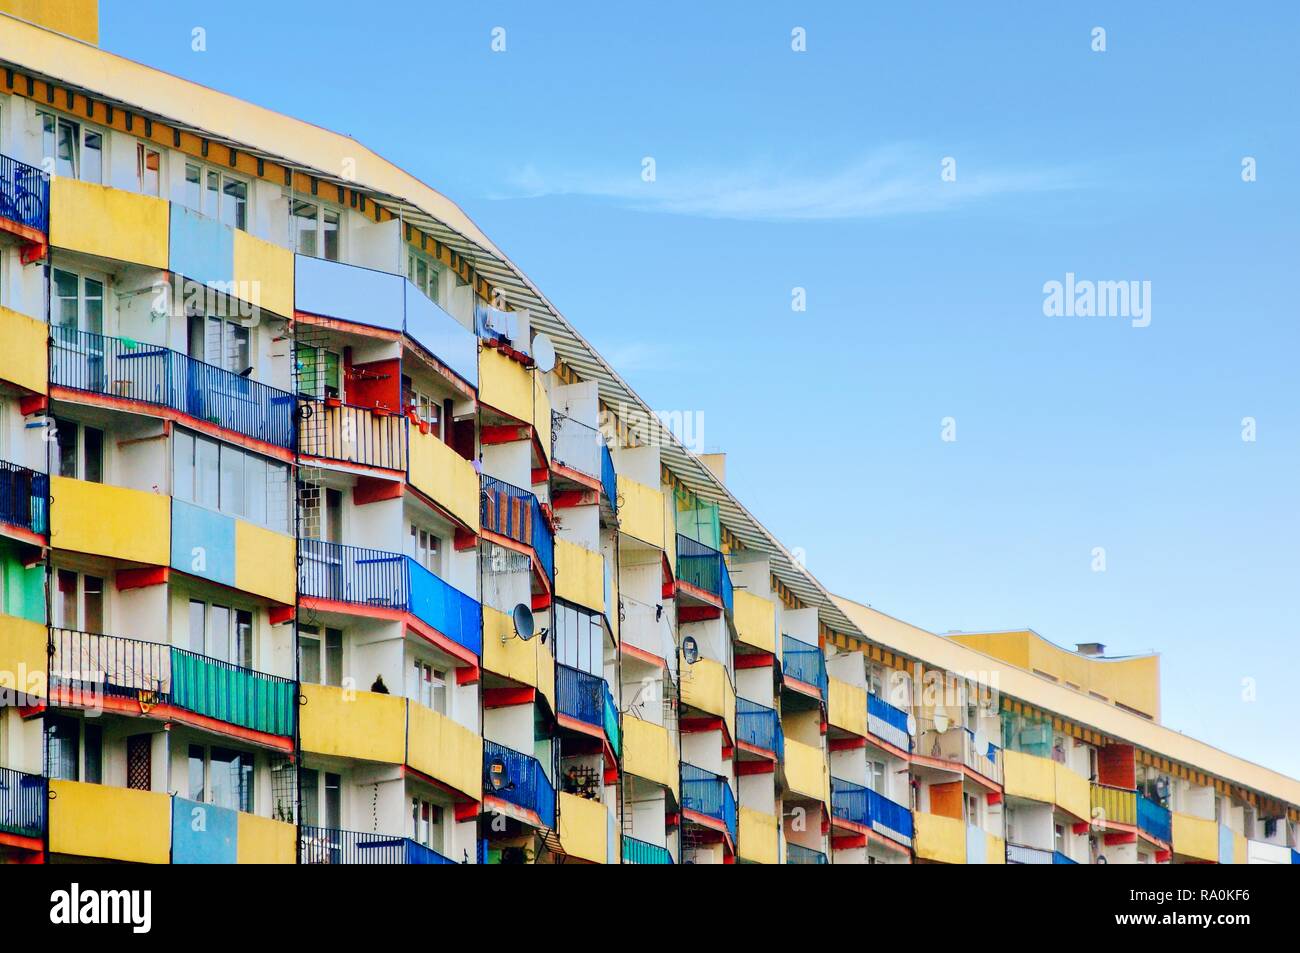 Residential buildings known for their length and wavy shape, called 'falowce' in Przymoze, a district of Gdansk, Poland. Stock Photo